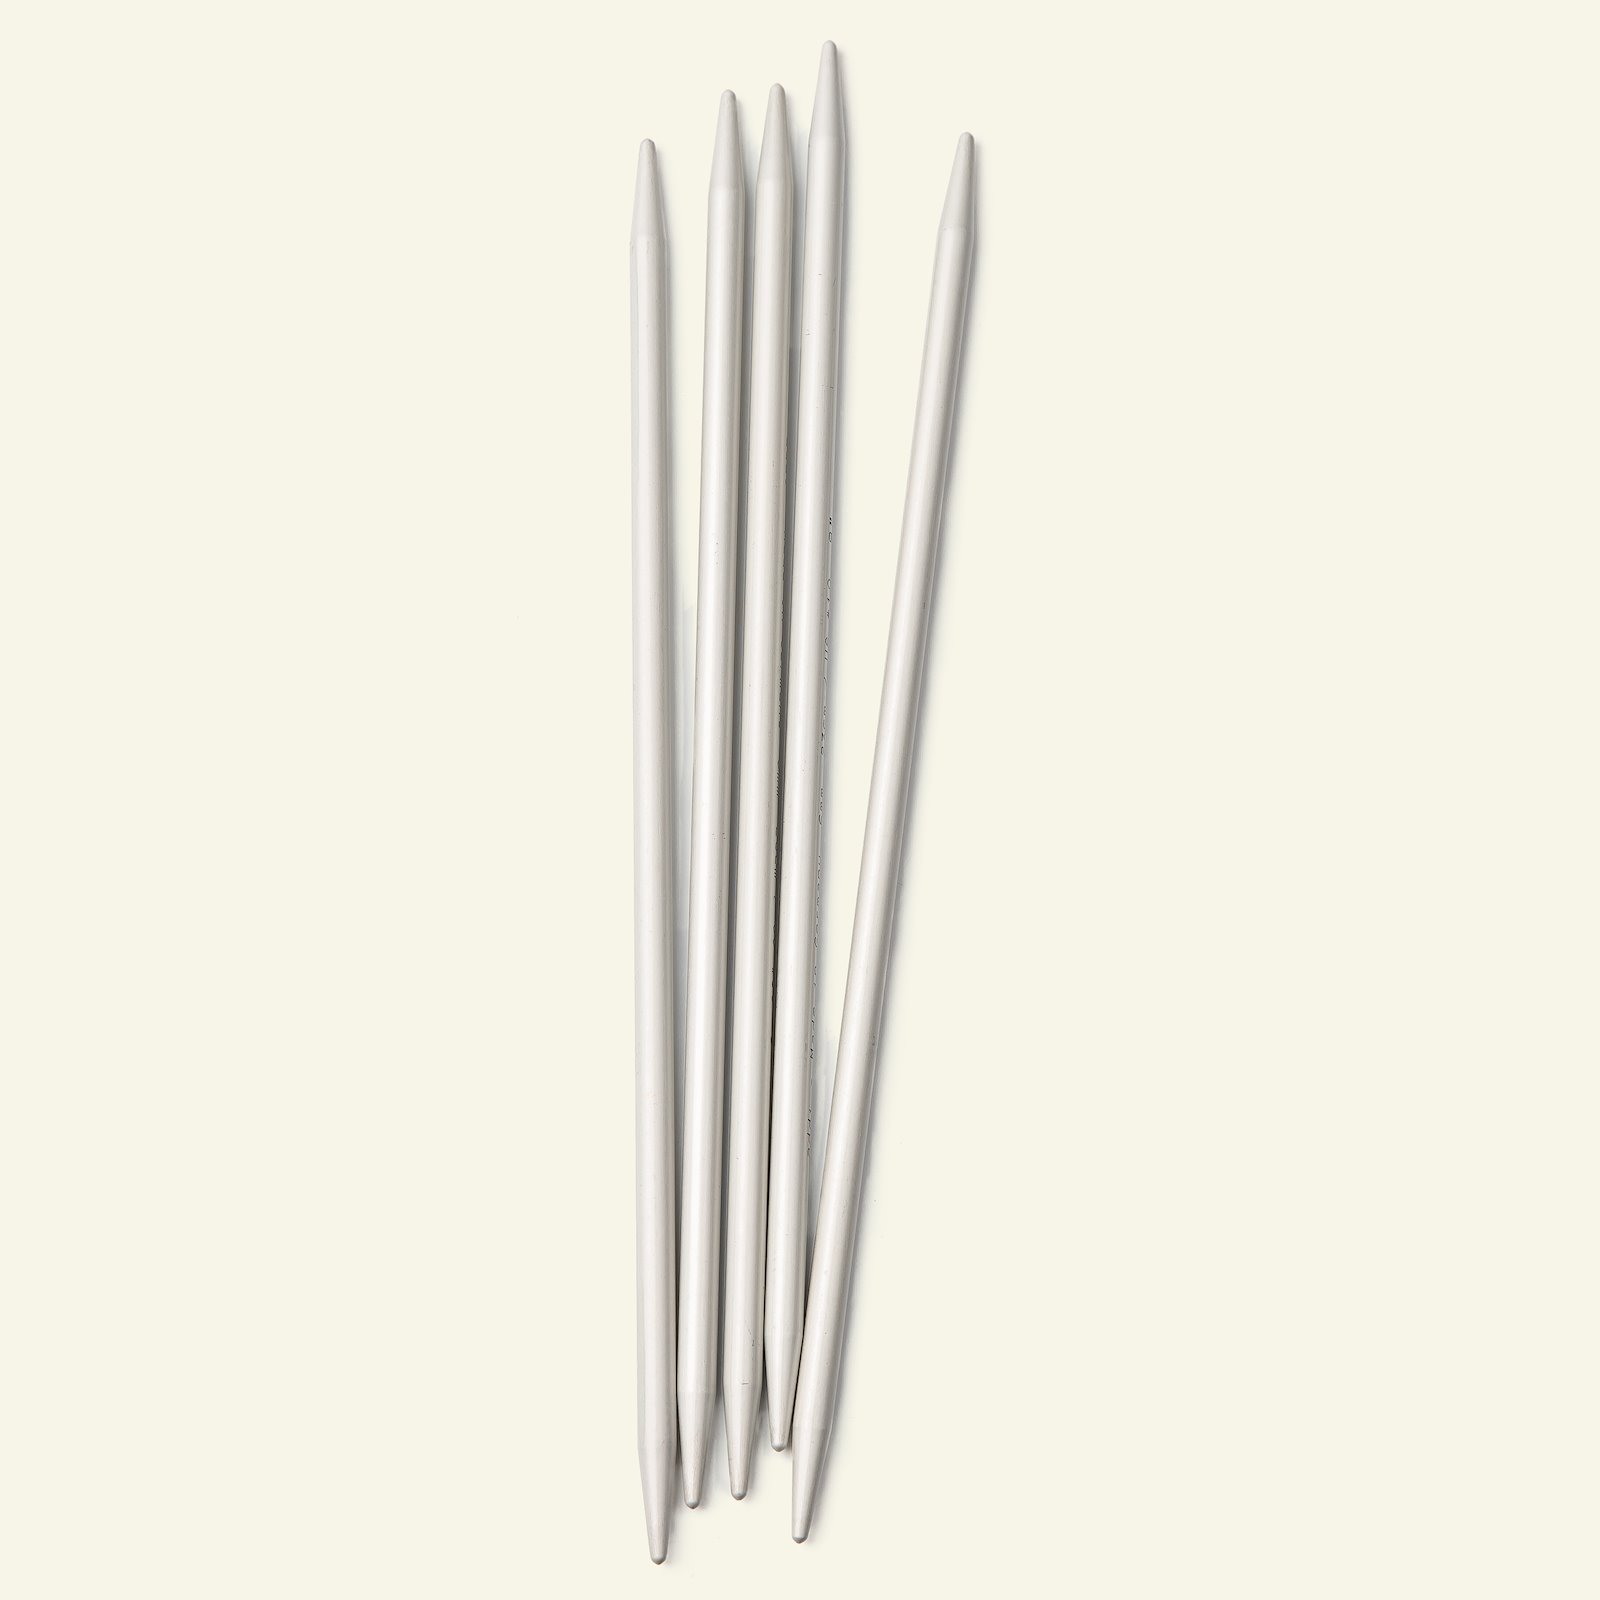 Addi double pointed needle 23cm 8mm 83057_pack